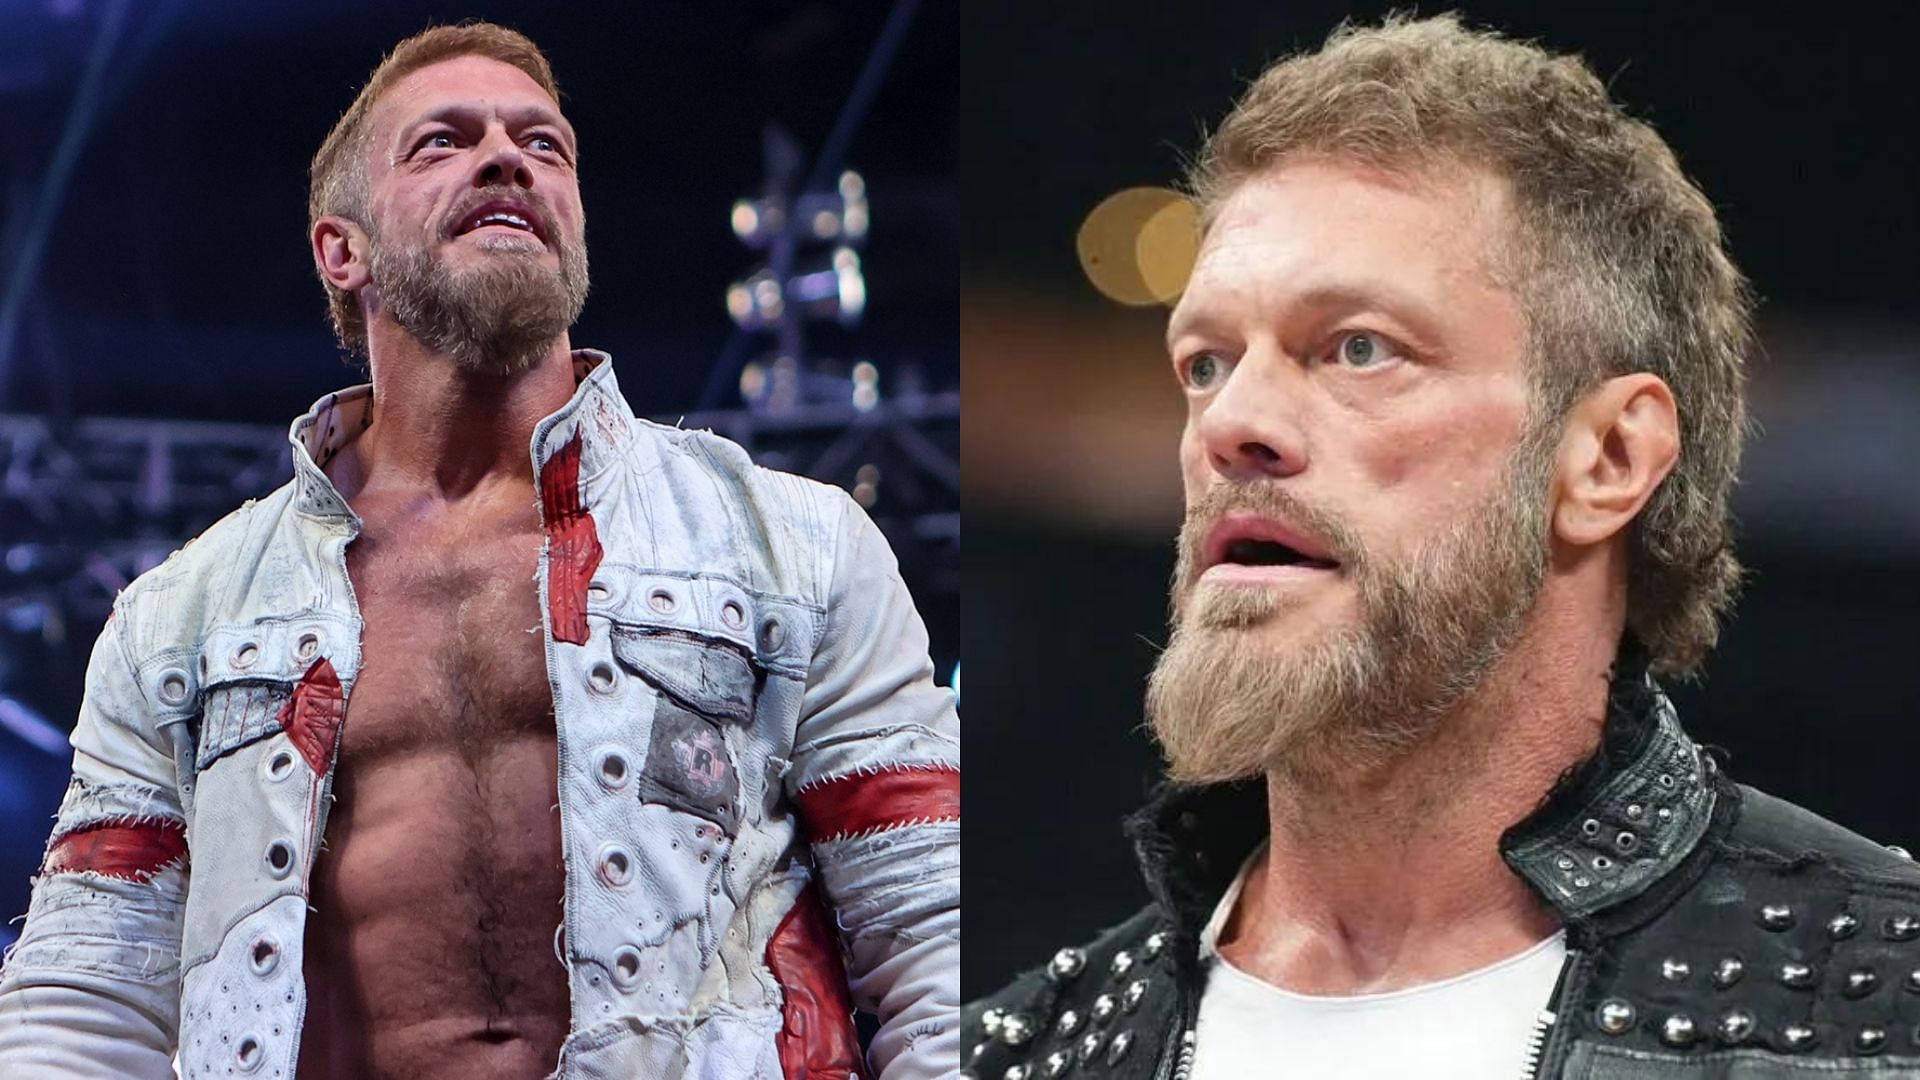 The Rated-R Superstar is in AEW now.